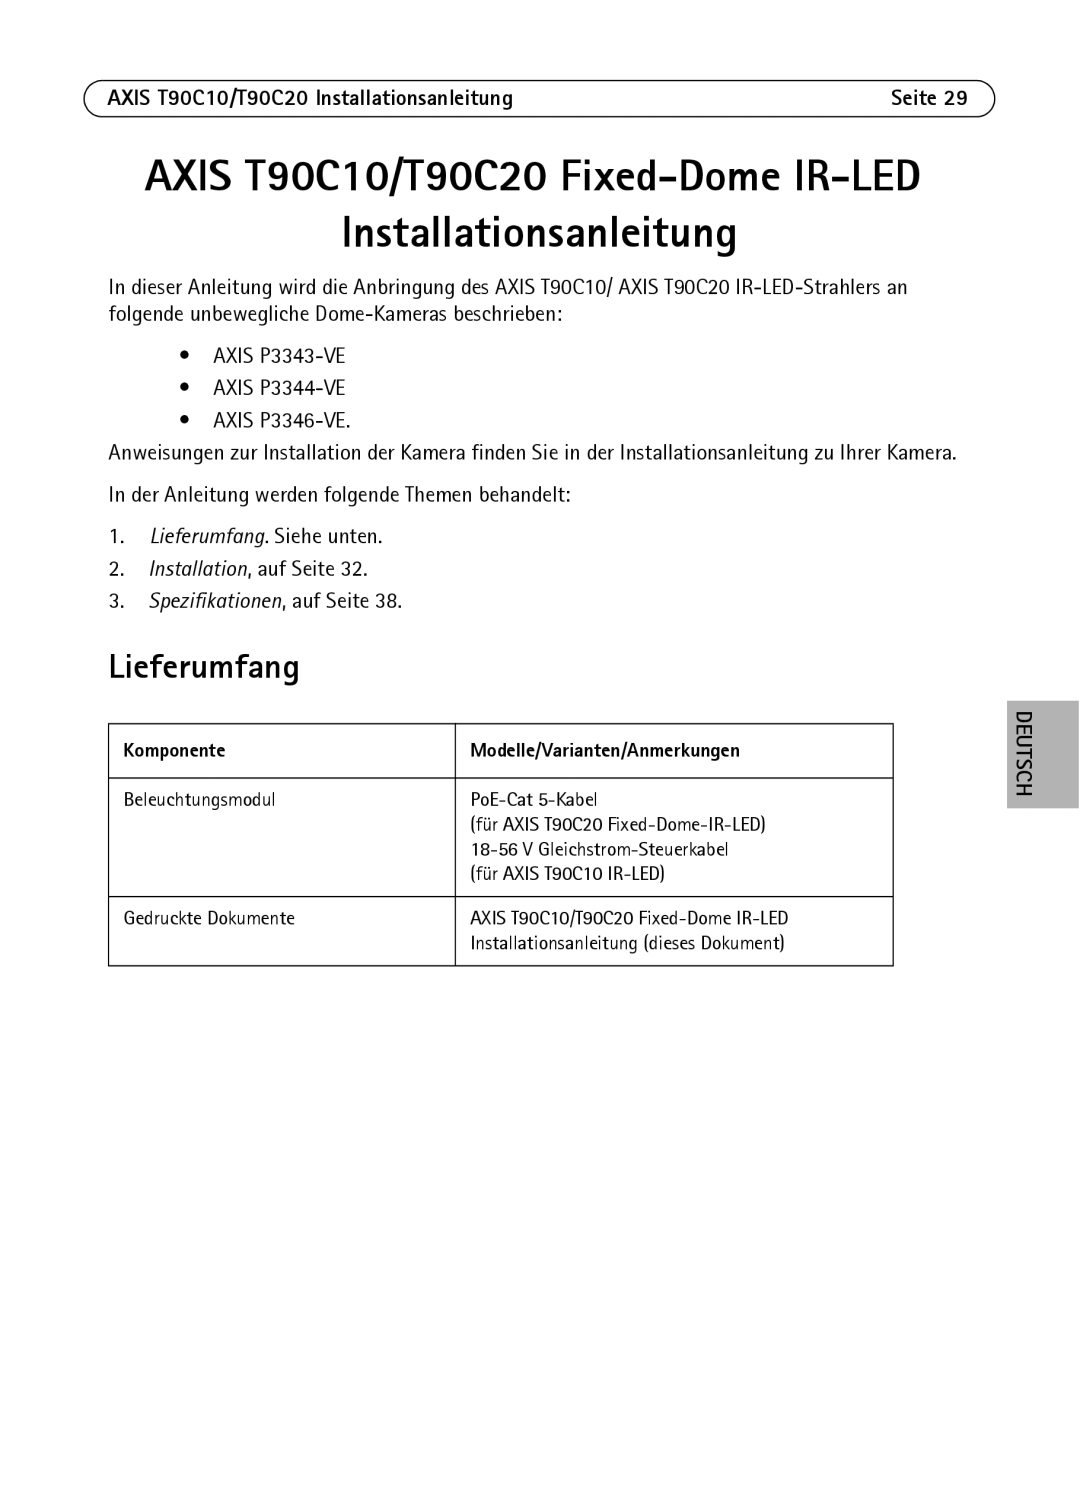 Axis Communications manual AXIS T90C10/T90C20 Fixed-Dome IR-LED, Installationsanleitung, Lieferumfang, Deutsch 